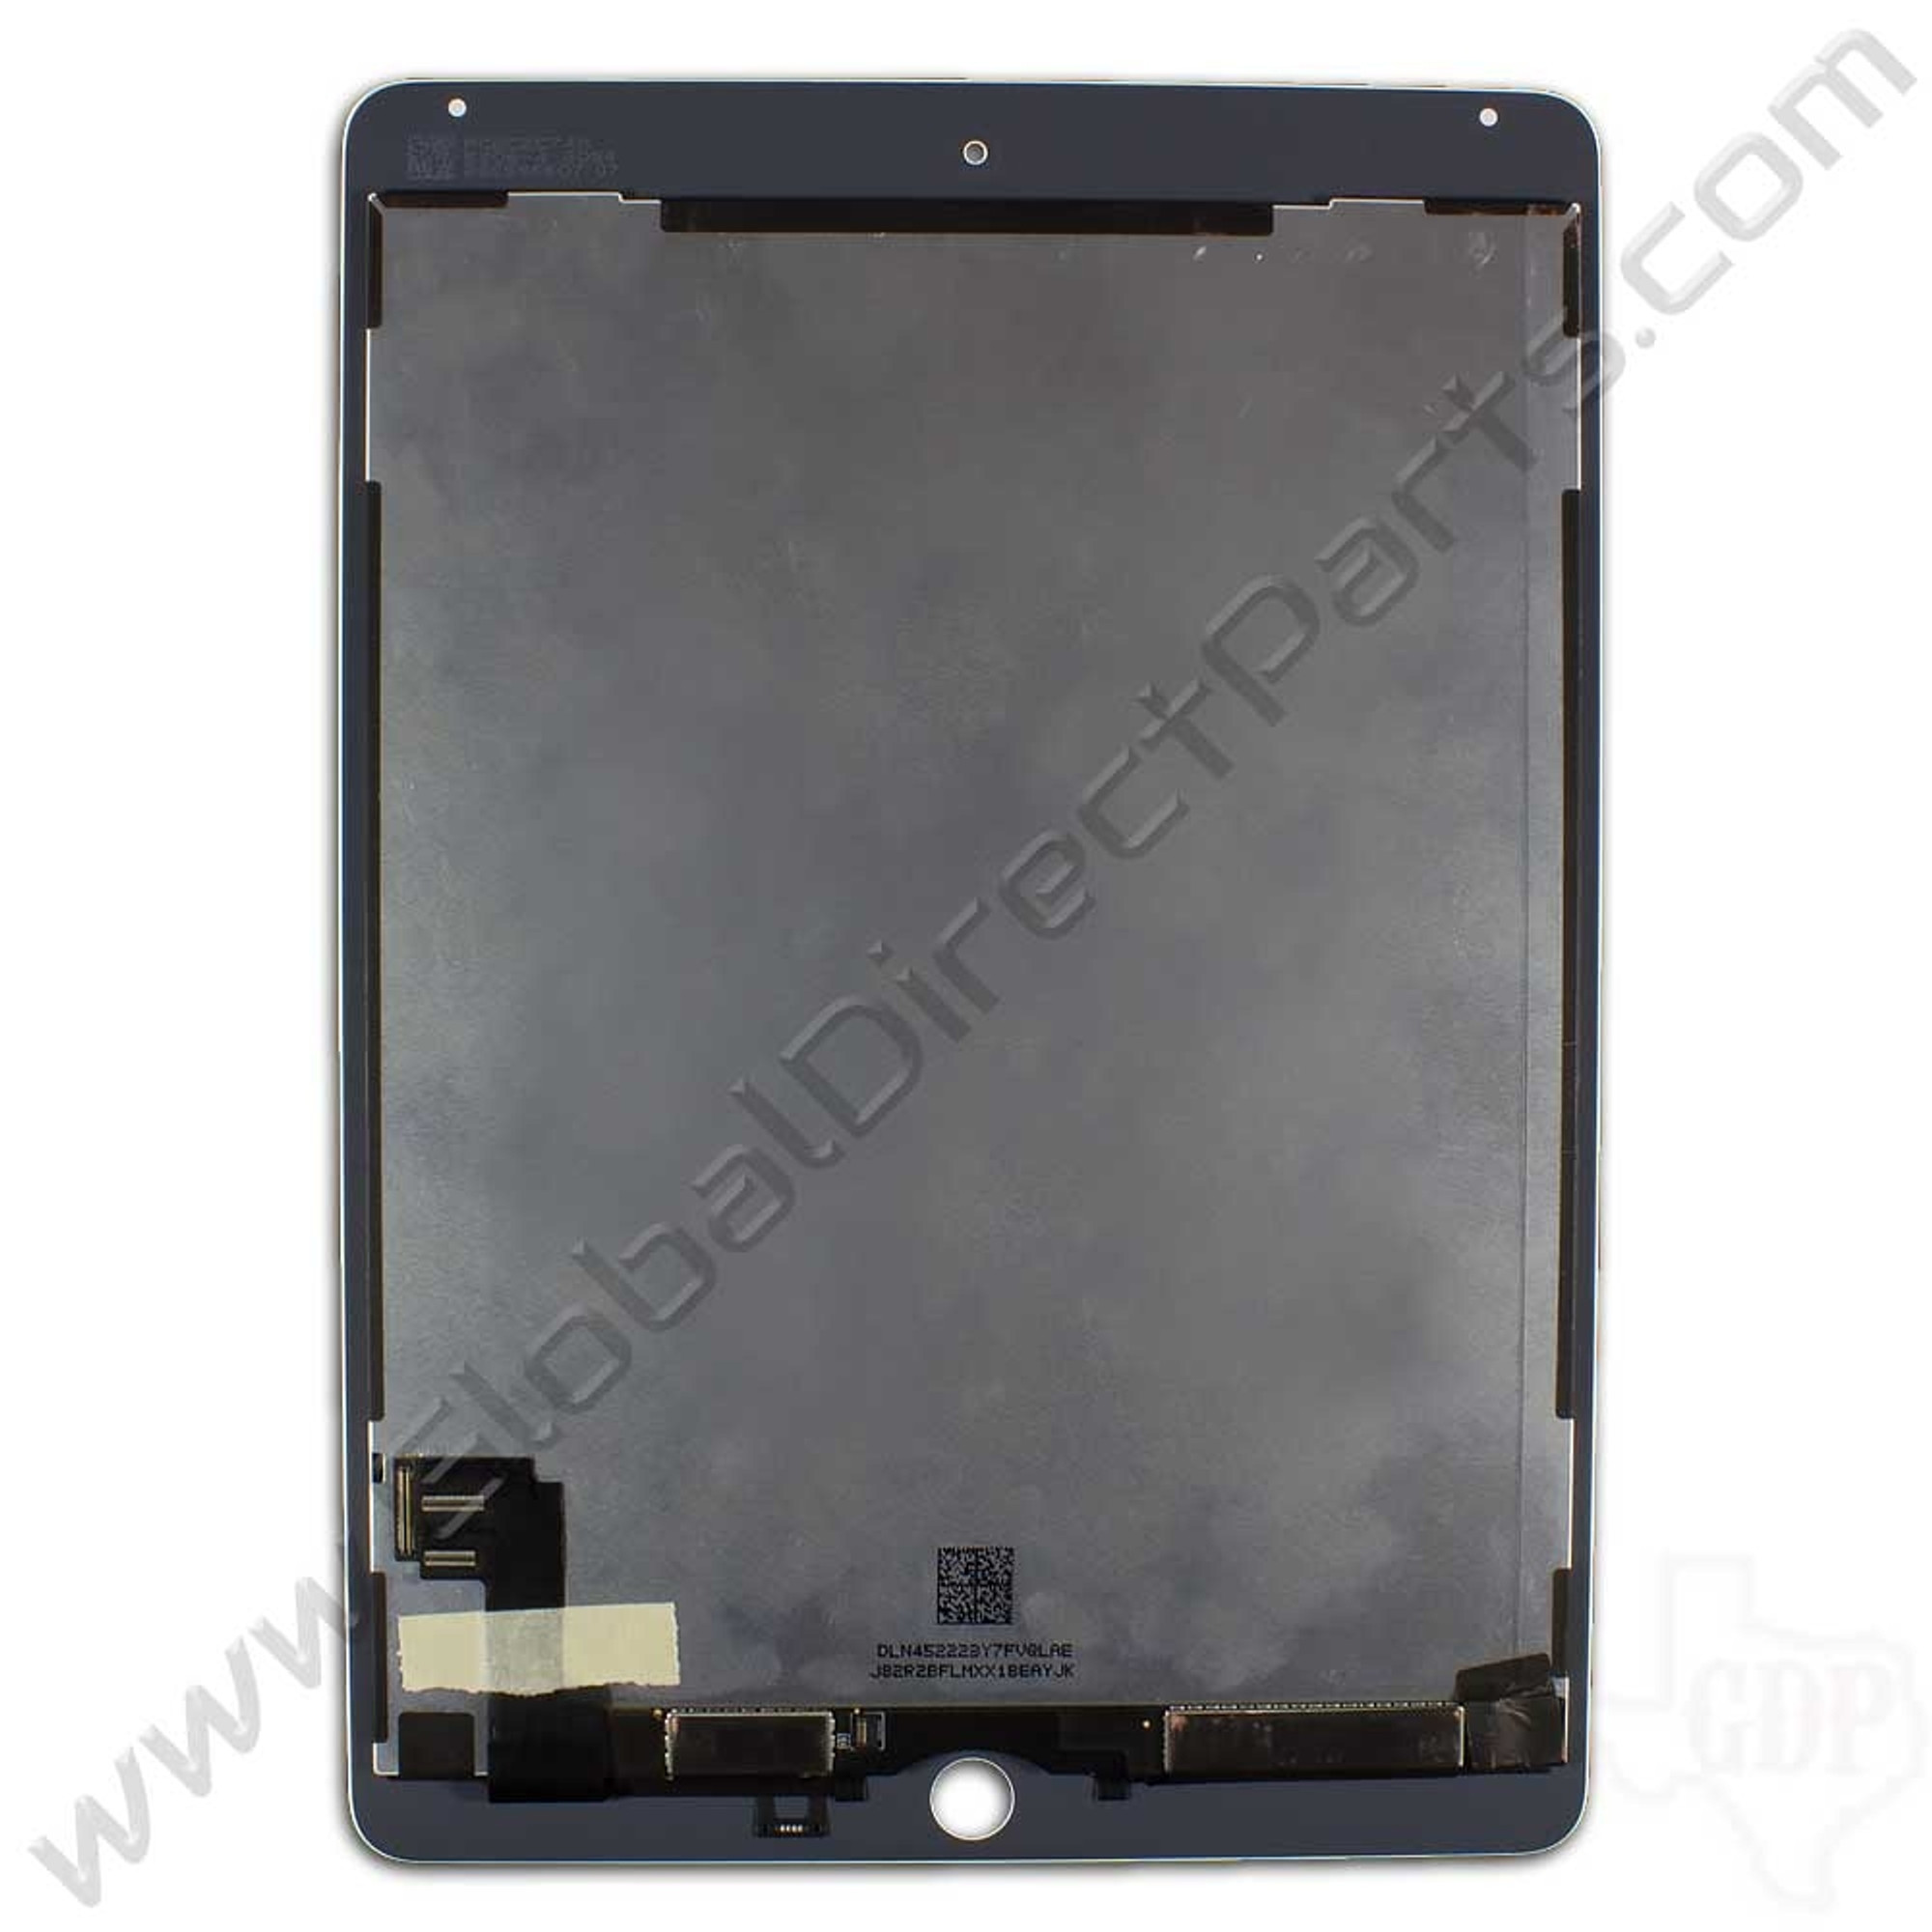 For Apple iPad Mini 5 LCD Screen and Digitizer Assembly Replacement - White  - Grade S+